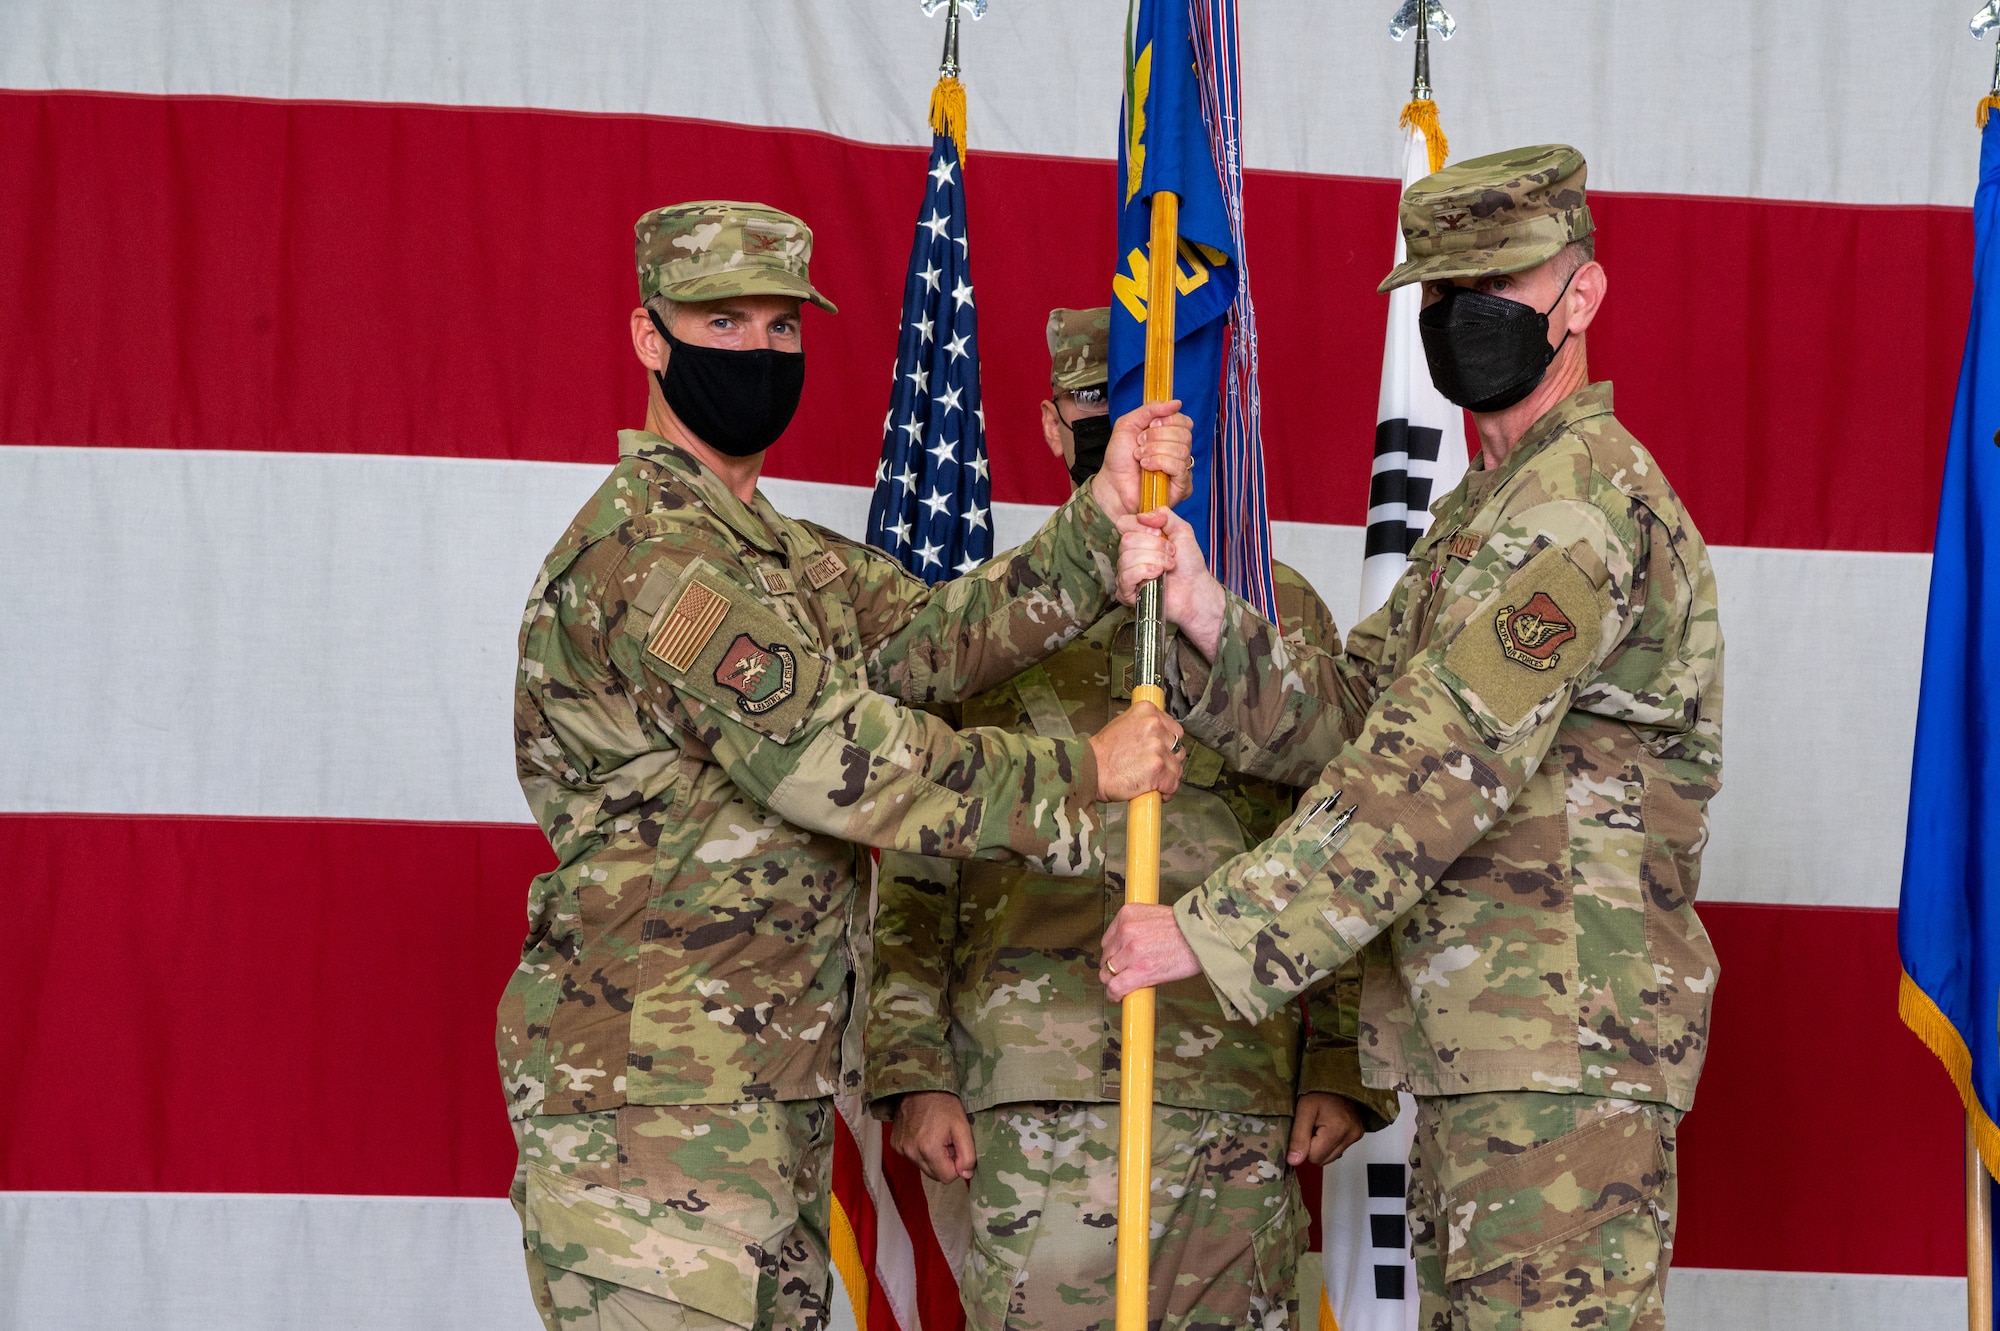 Col. Joshua Wood, 51st Fighter Wing commander, left, receives the 51st Medical Group guidon from Col. Michael Fea, 51st Medical Group outgoing commander, during the change of command ceremony at Osan Air Base, Republic of Korea, July 12, 2021. This act marks the official end of Fea’s command of the 51st MDG. (U.S. Air Force photo by Tech. Sgt. Nicholas Alder)